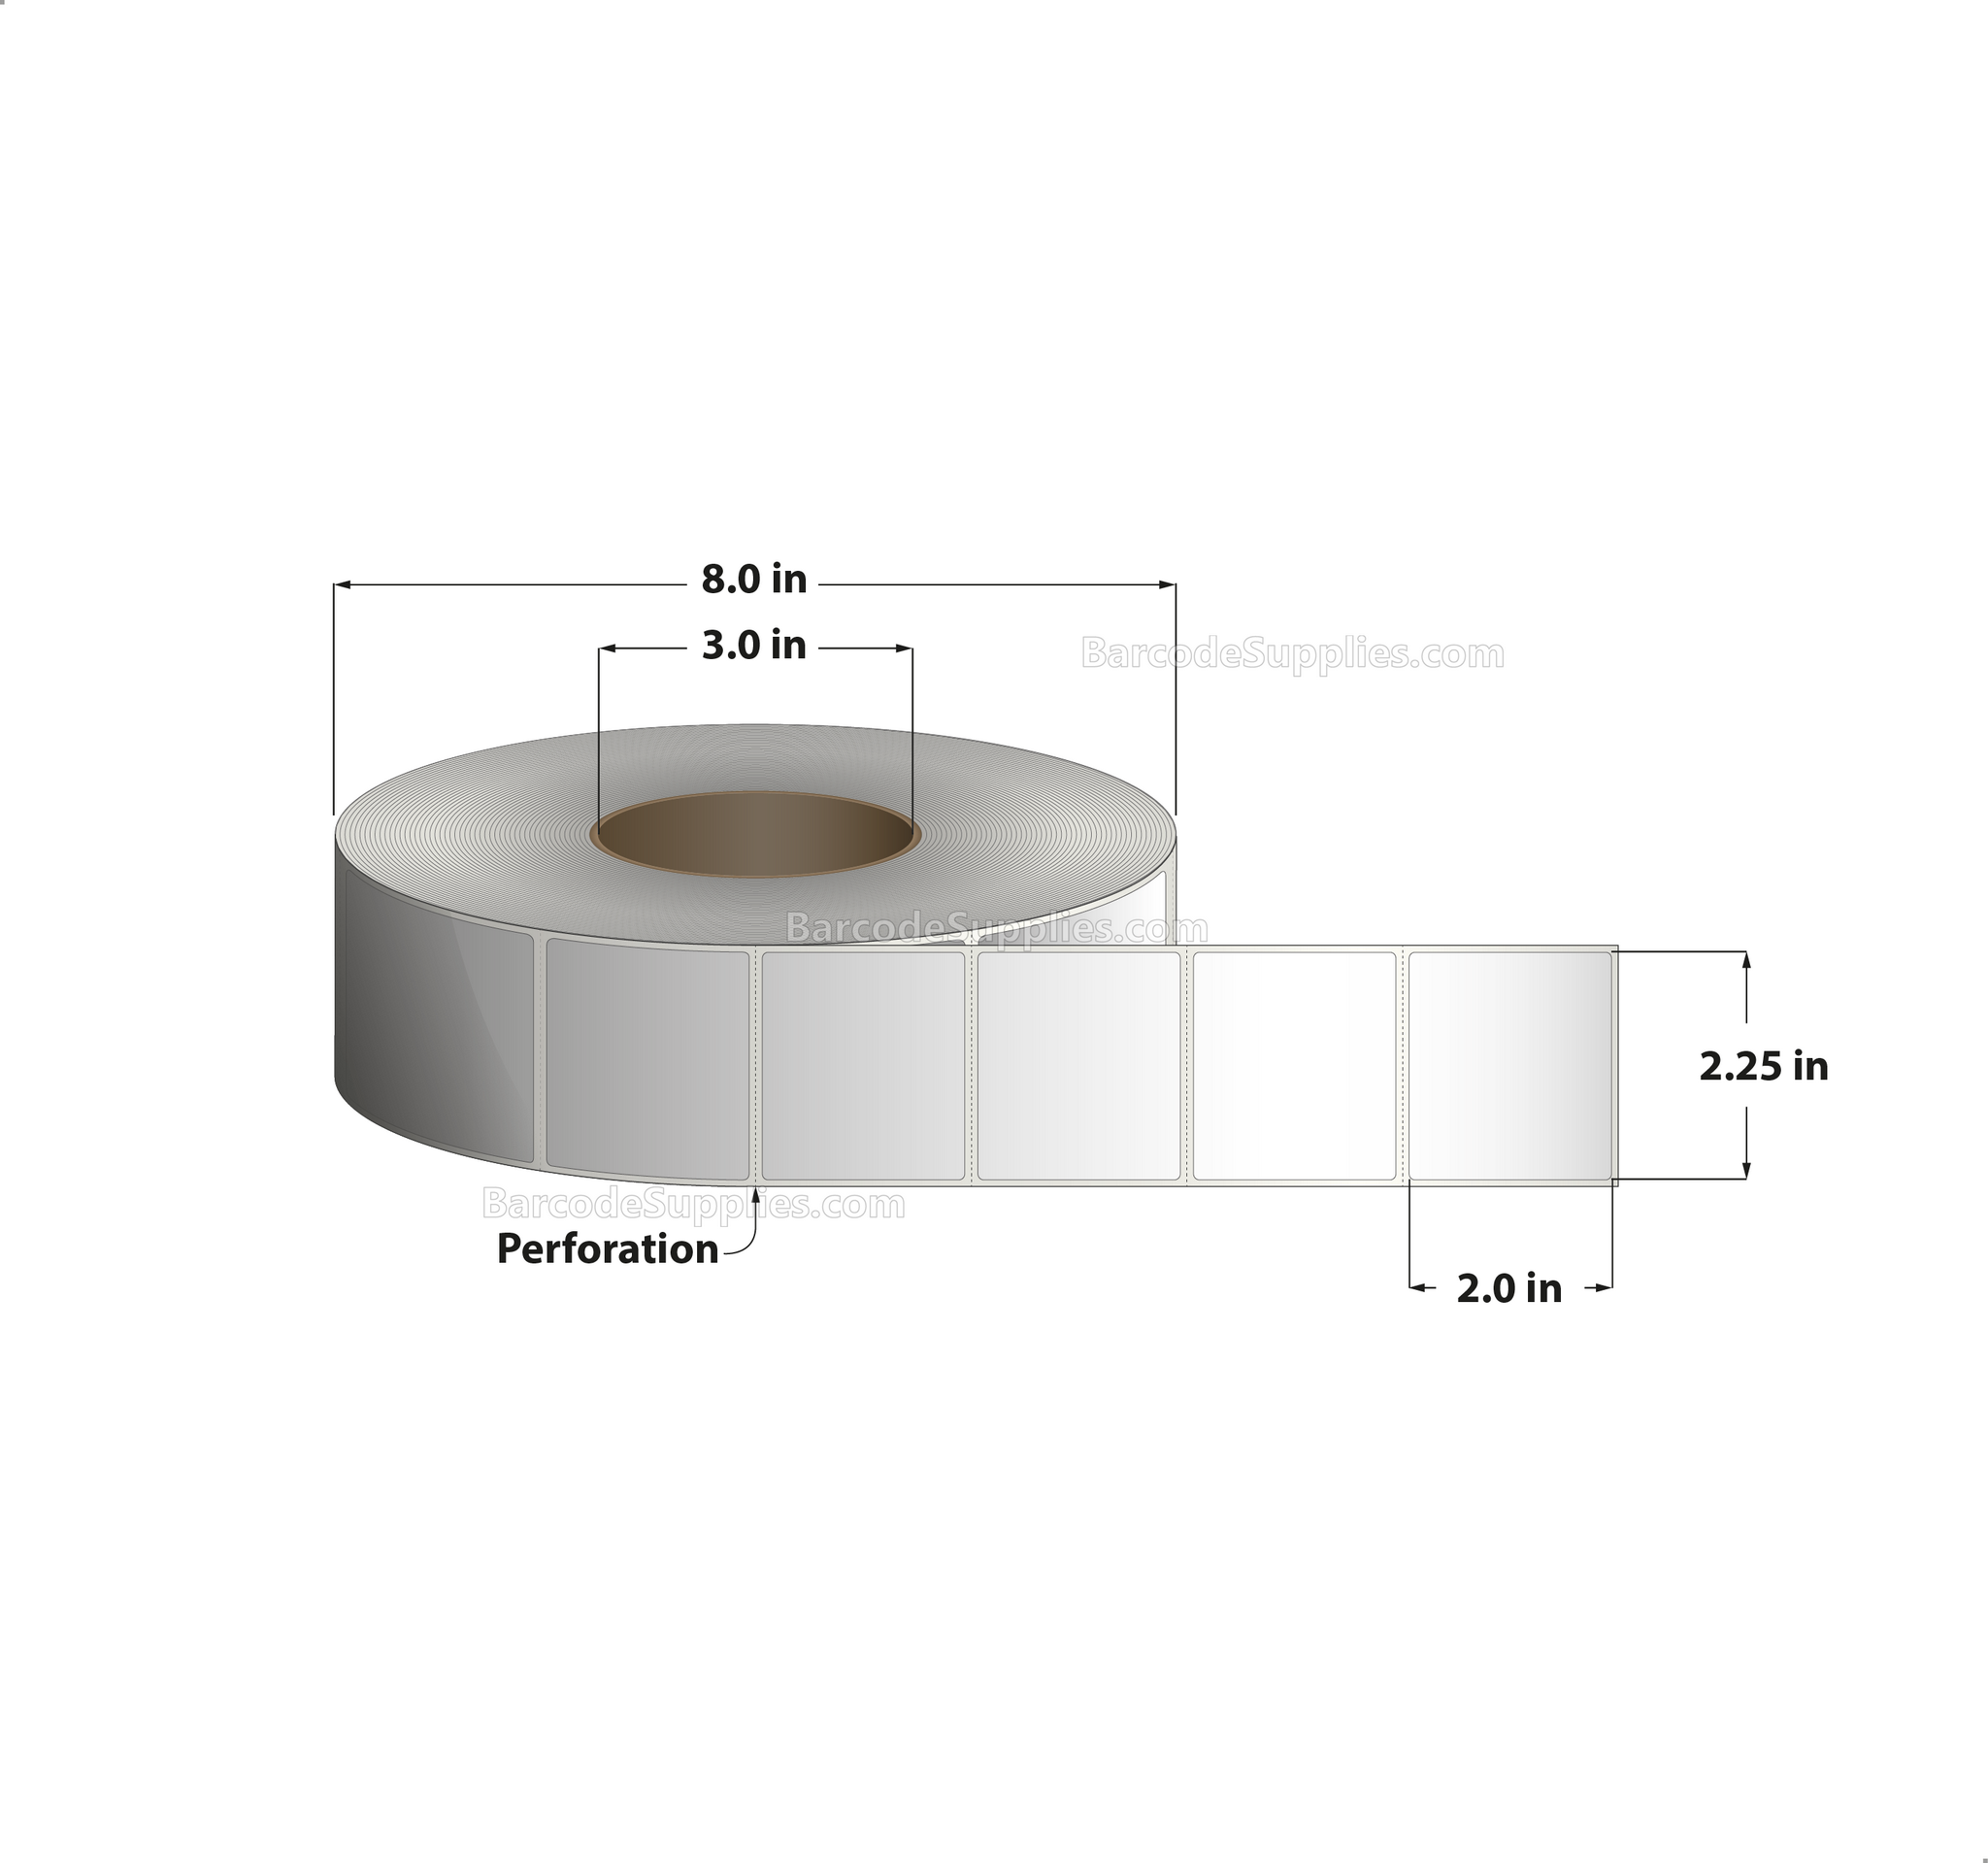 2.25 x 2 Thermal Transfer White Labels With Permanent Adhesive - Perforated - 2900 Labels Per Roll - Carton Of 8 Rolls - 23200 Labels Total - MPN: RT-225-2-2900-3